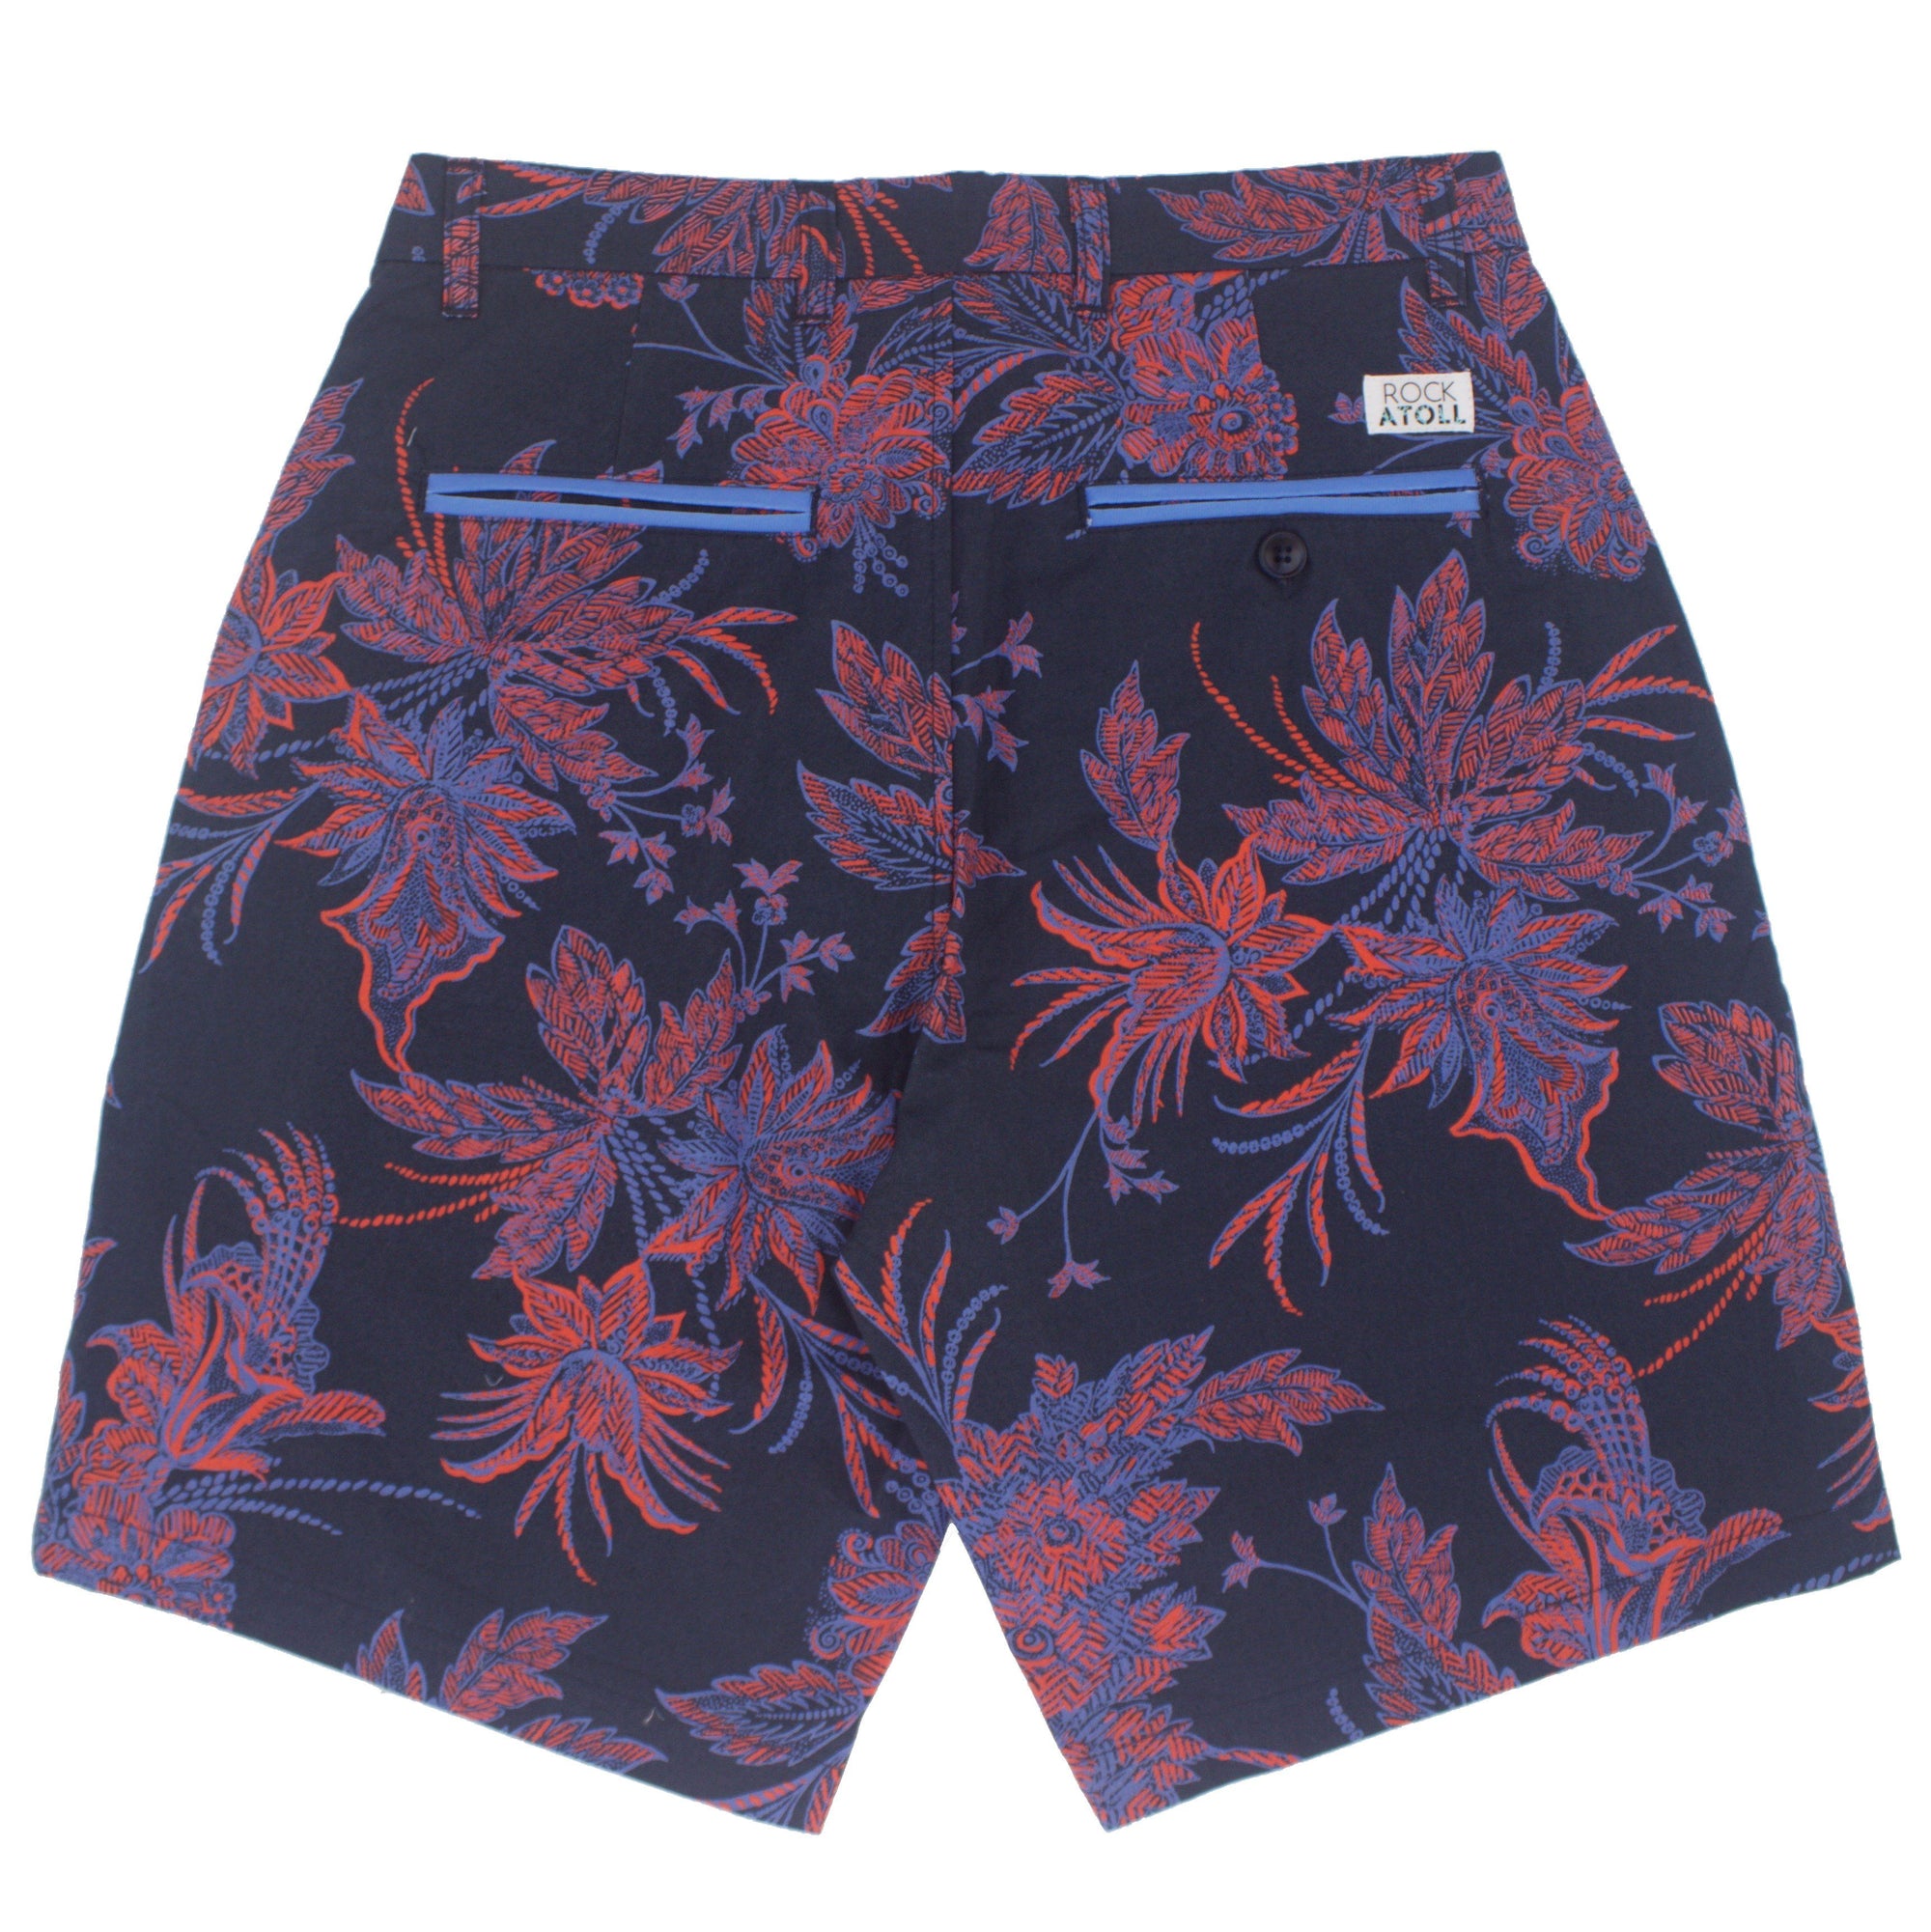 Red And Blue Shorts For Men. Buy Mens Floral Shorts Online